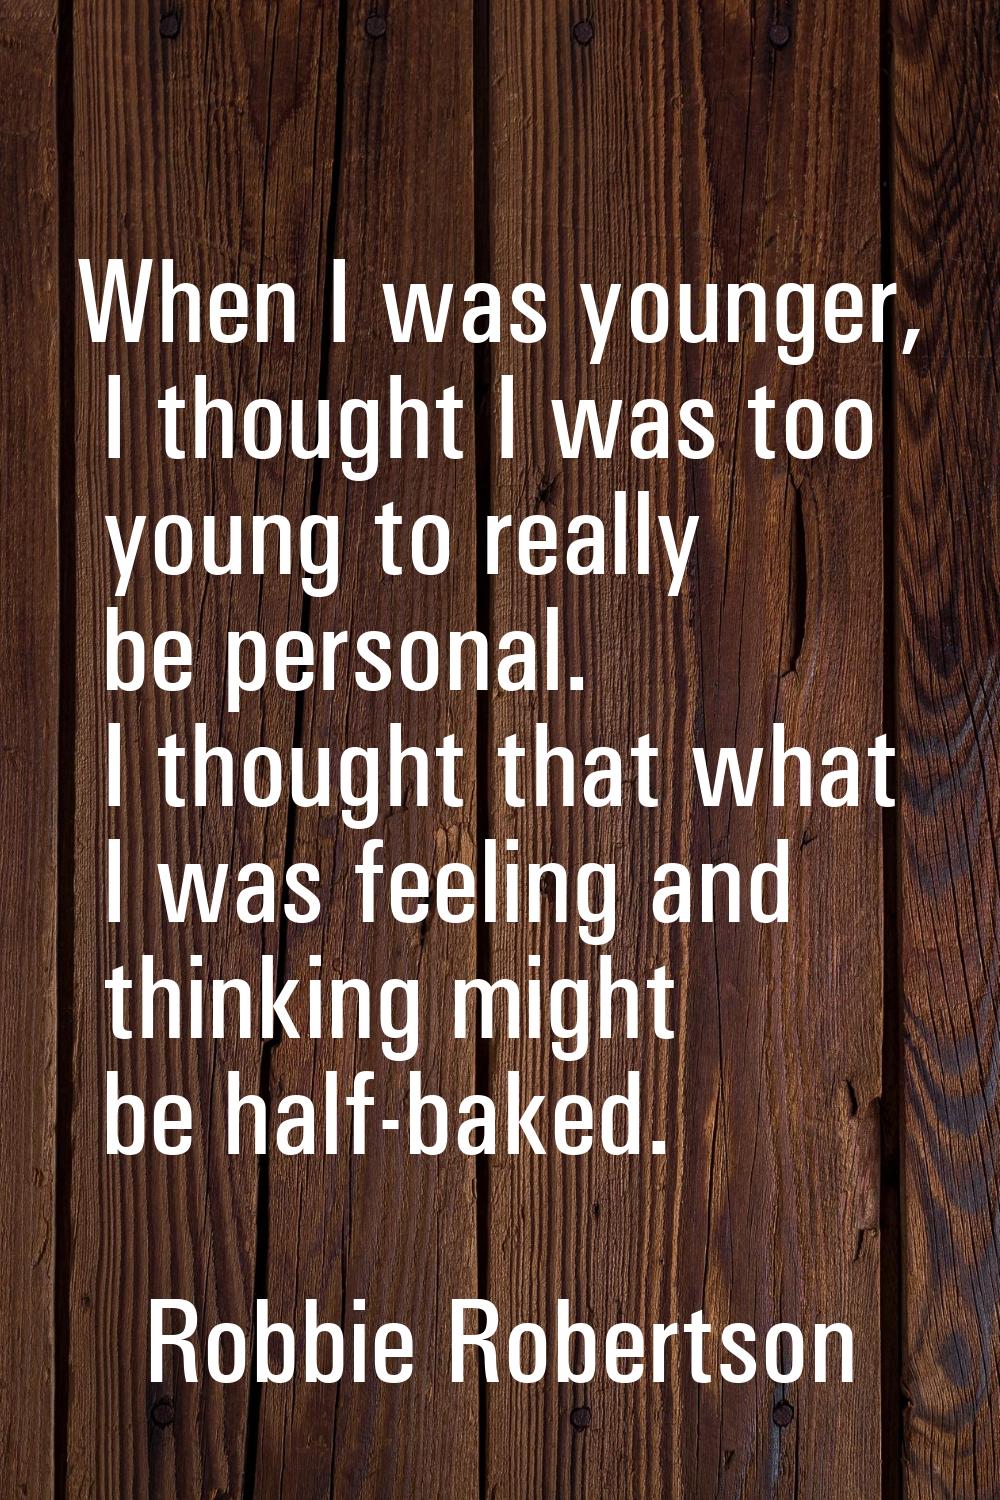 When I was younger, I thought I was too young to really be personal. I thought that what I was feel